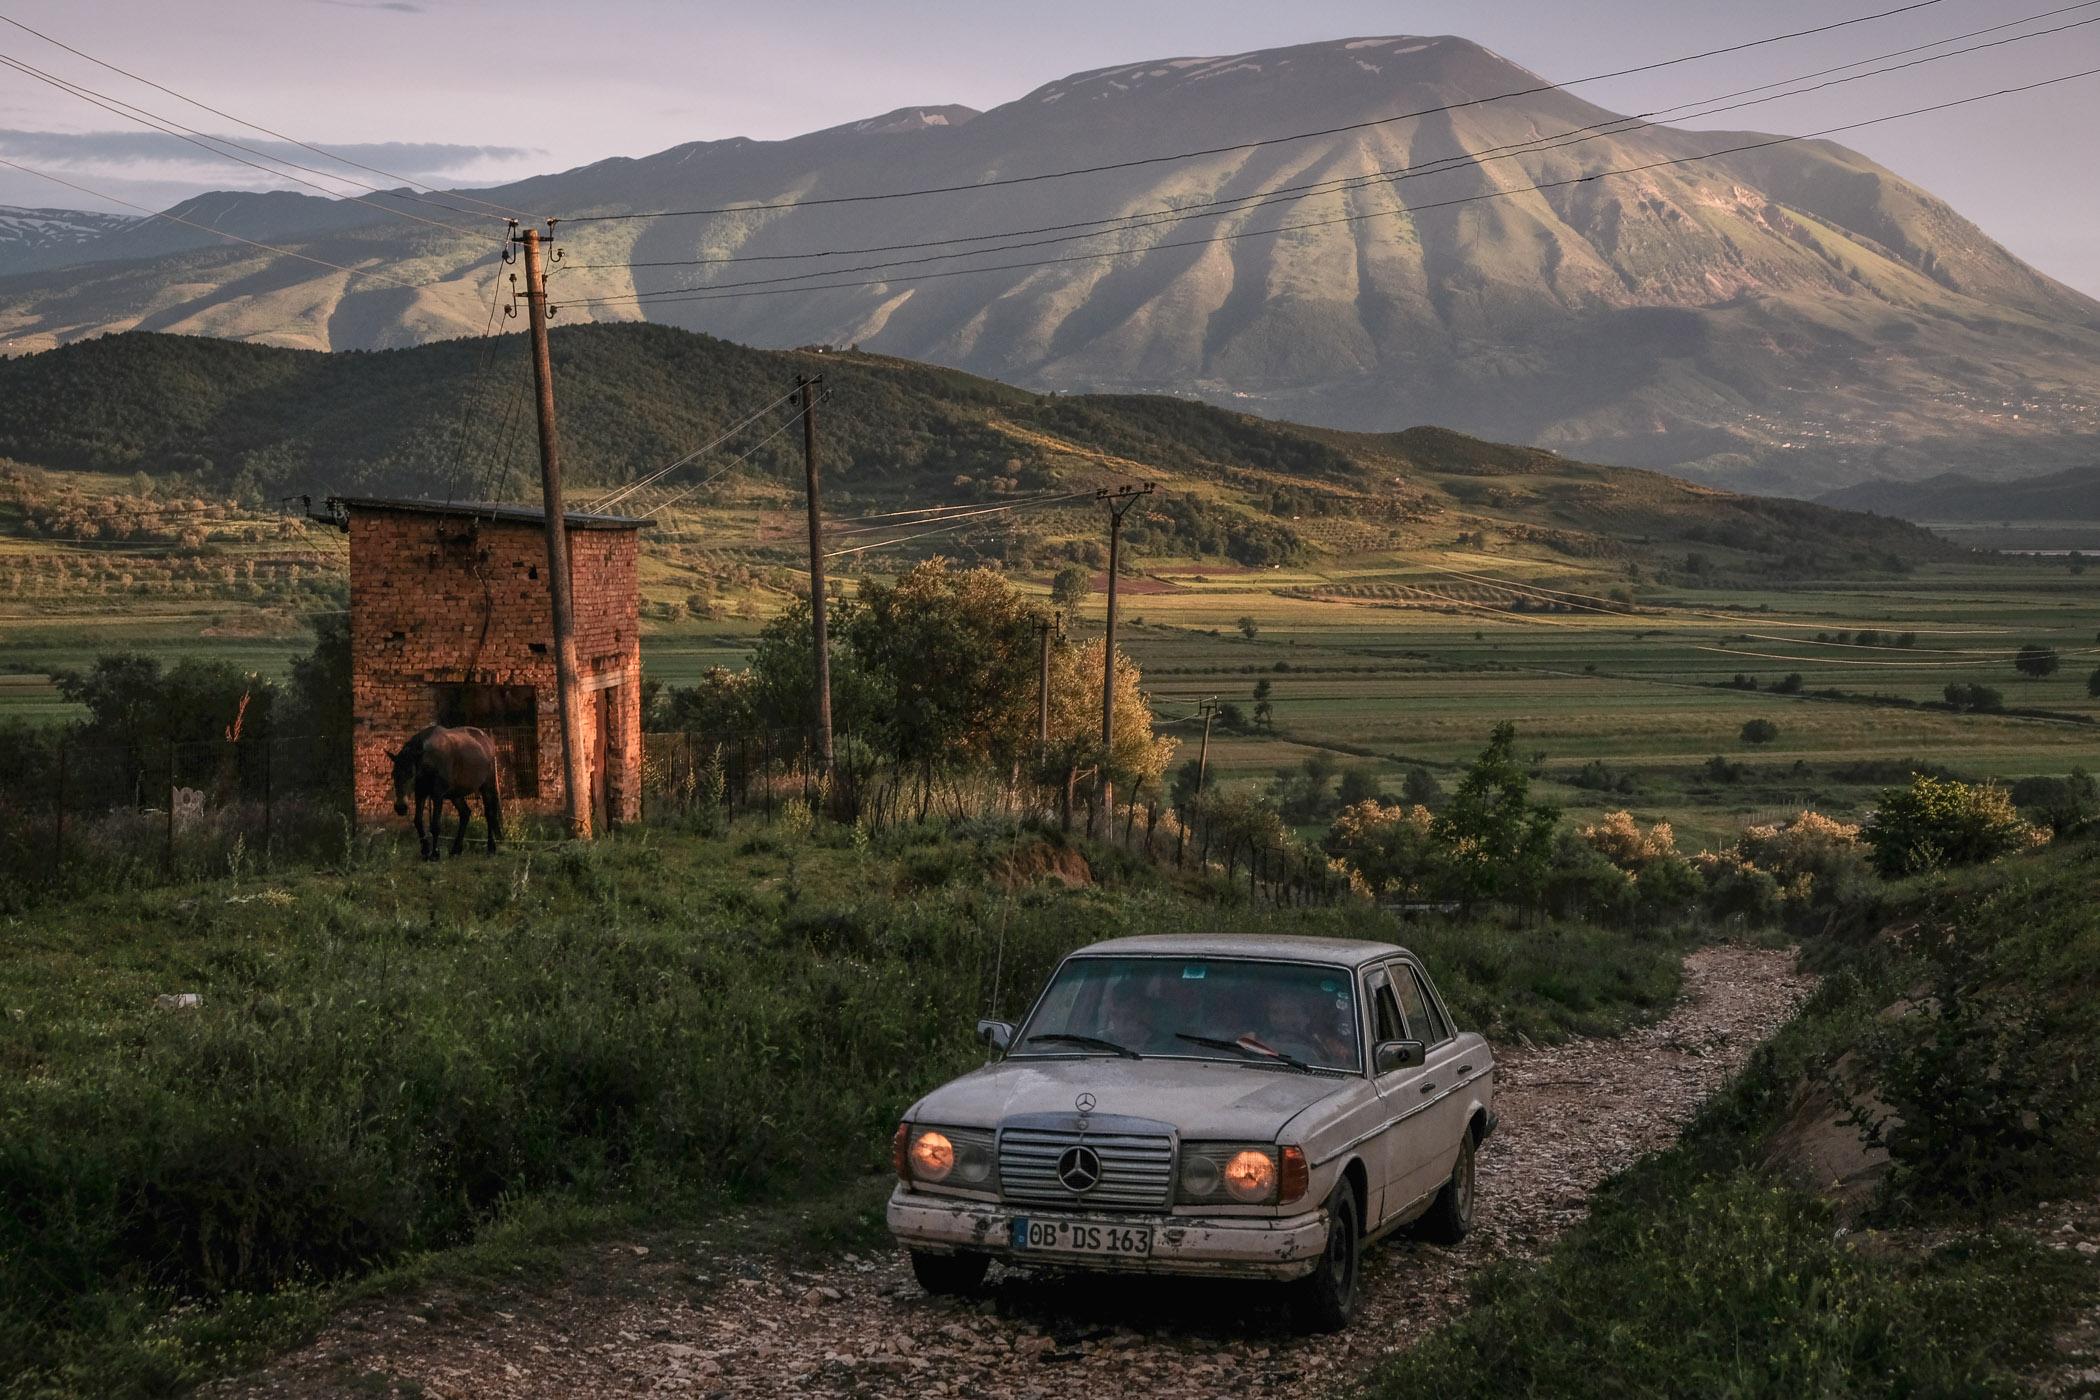 A car returning from farmland near the village of Kuta in southern Albania. Located between the sites for two proposed hydropower dams, most of the agricultural land below would be flooded by a reservoir should the projects move forward.